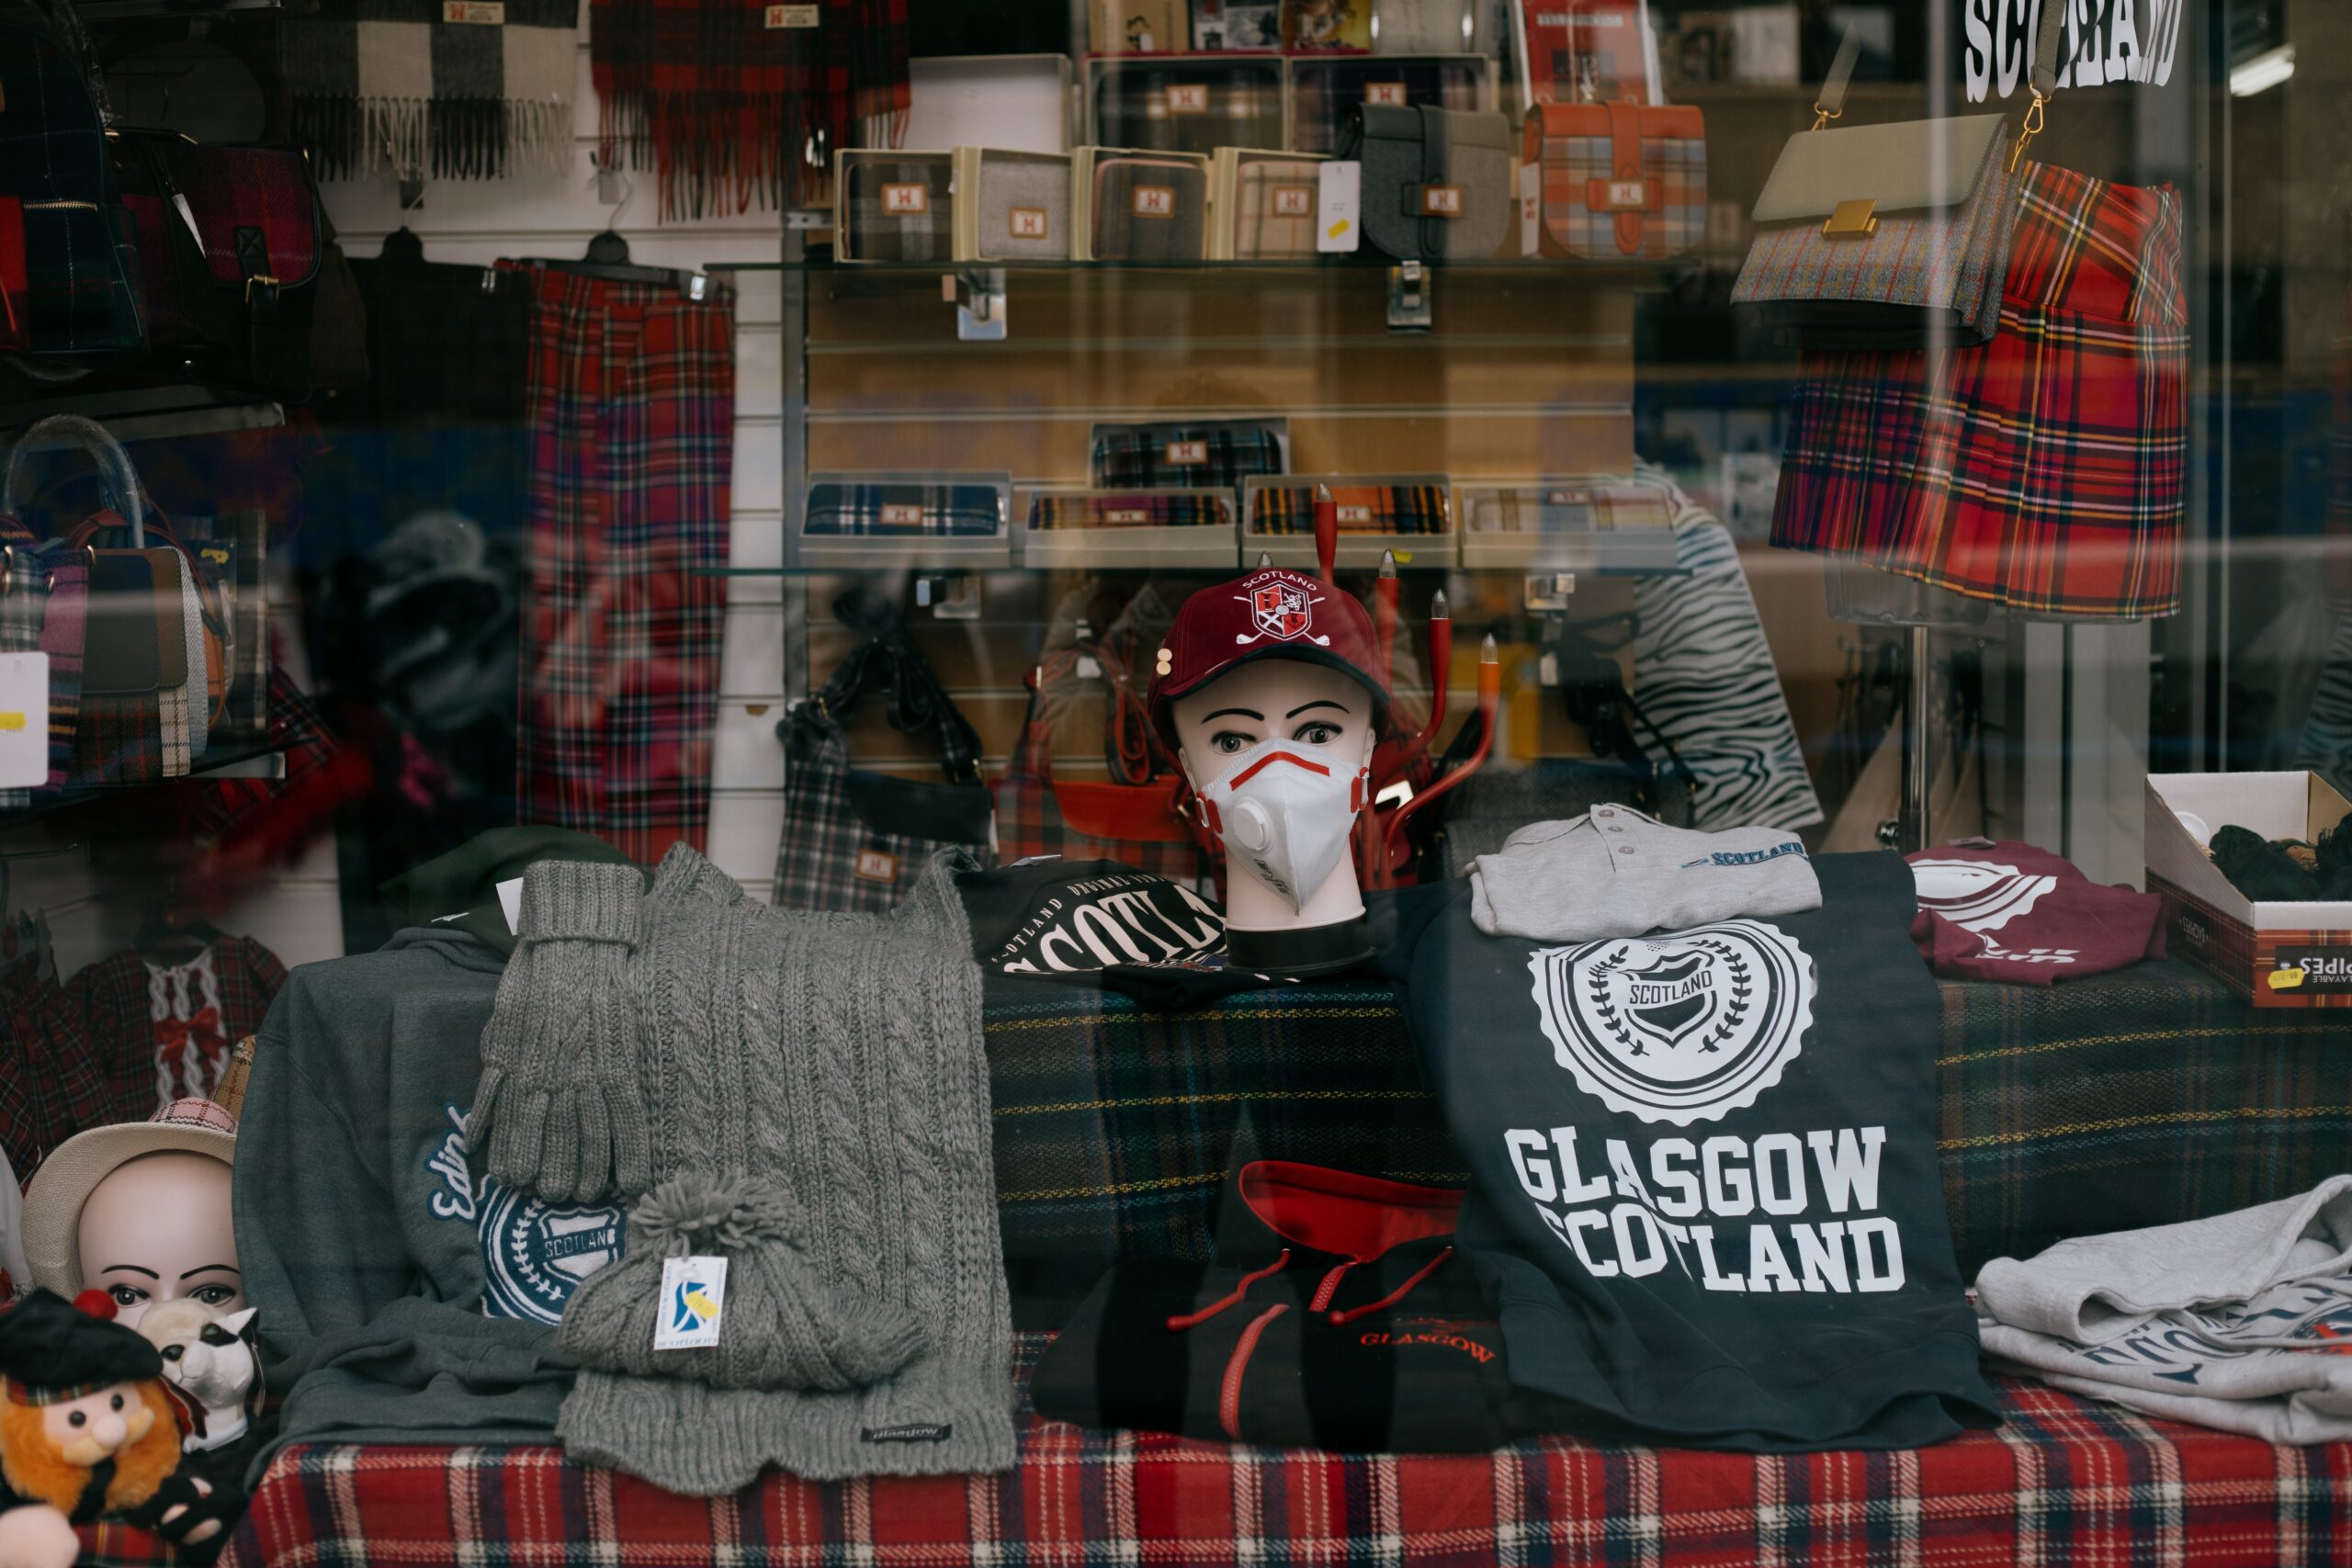 The Best Guide to Glasgow’s Southside